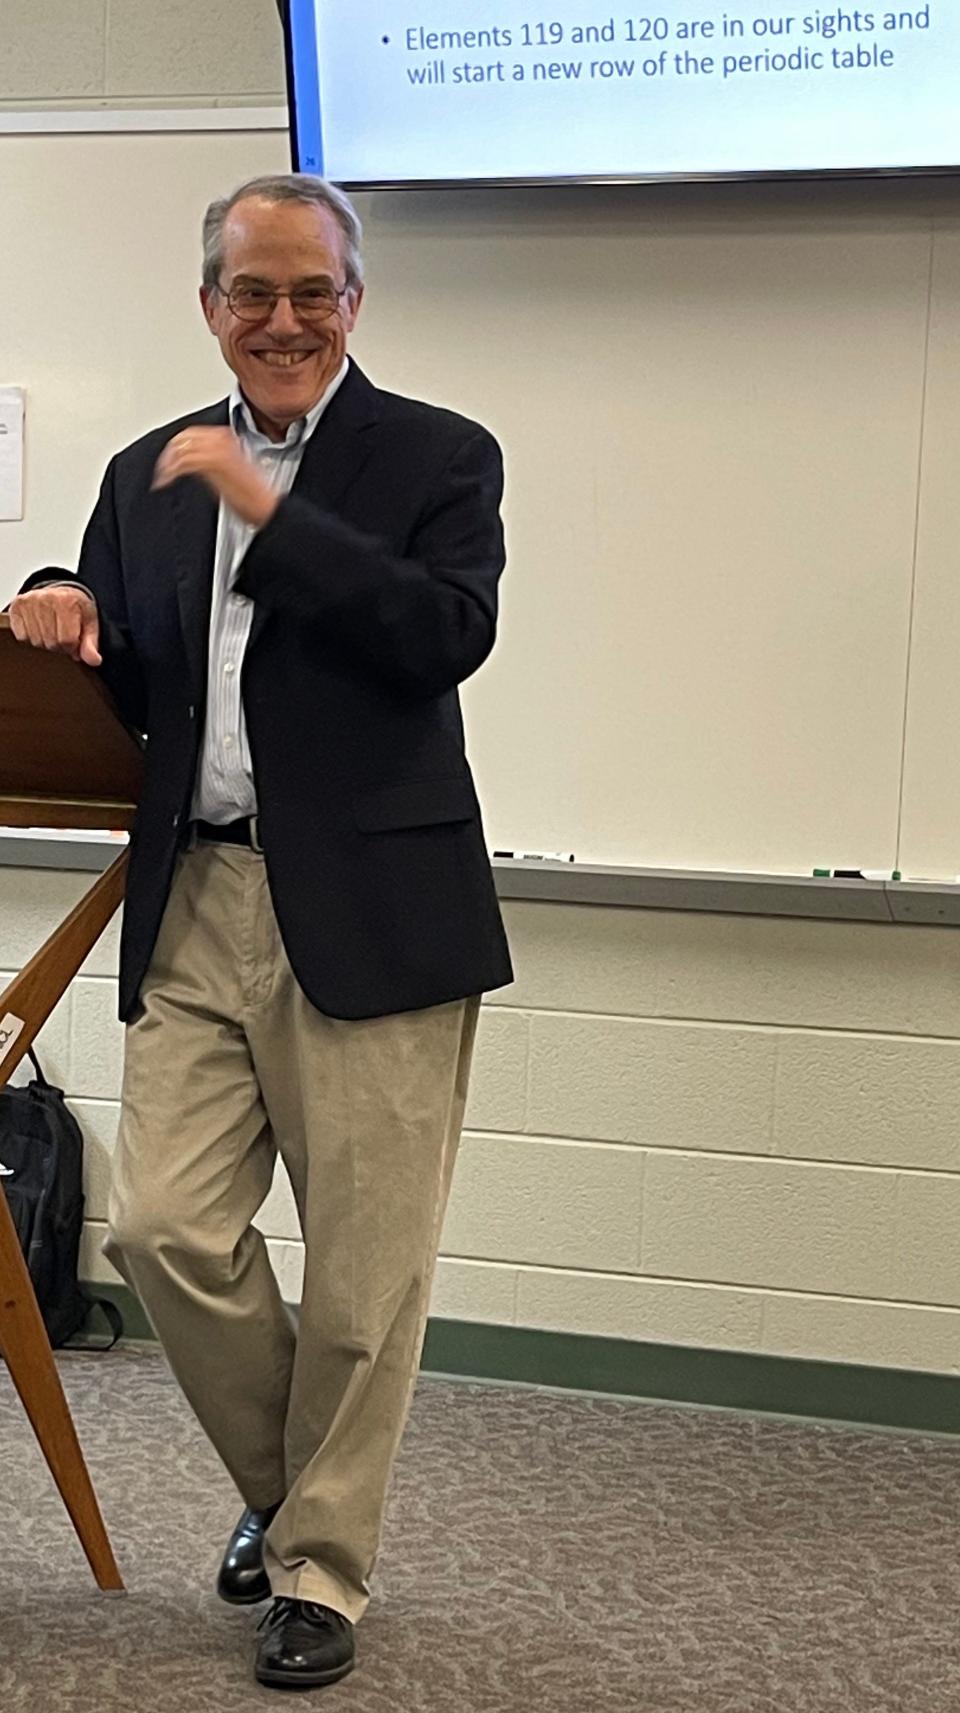 Jim Roberto tells an Oak Ridge Institute for Continue Learing (ORICL) class about Oak Ridge National Laboratory’s role in the discovery of elements in the periodic table.